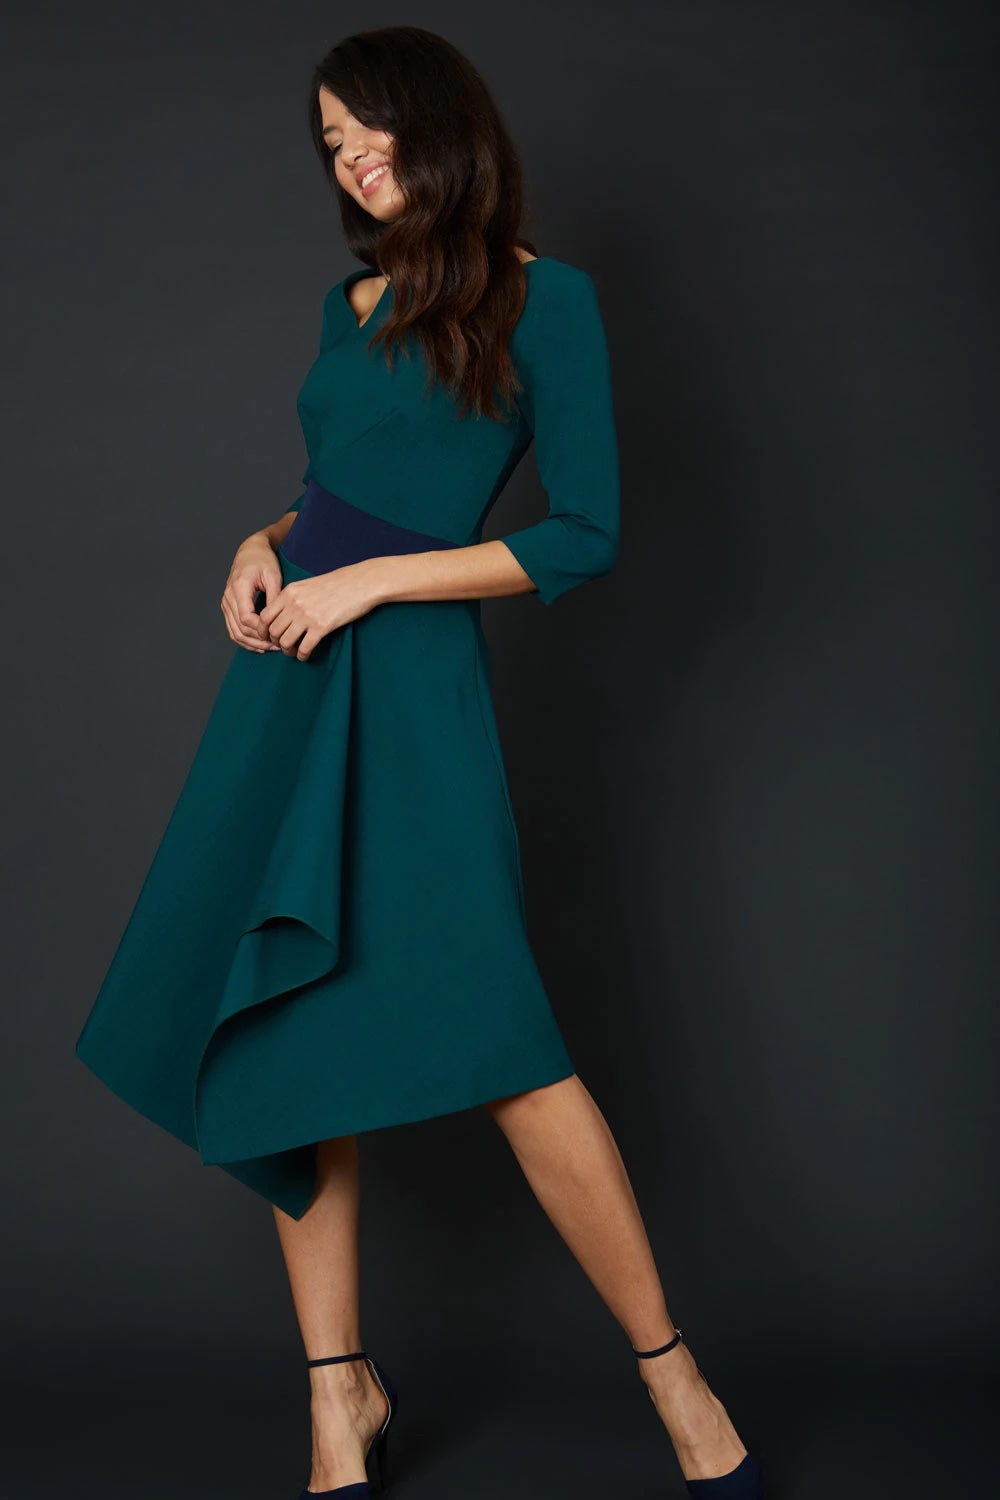 Pinto Dress - Forest Green and Navy